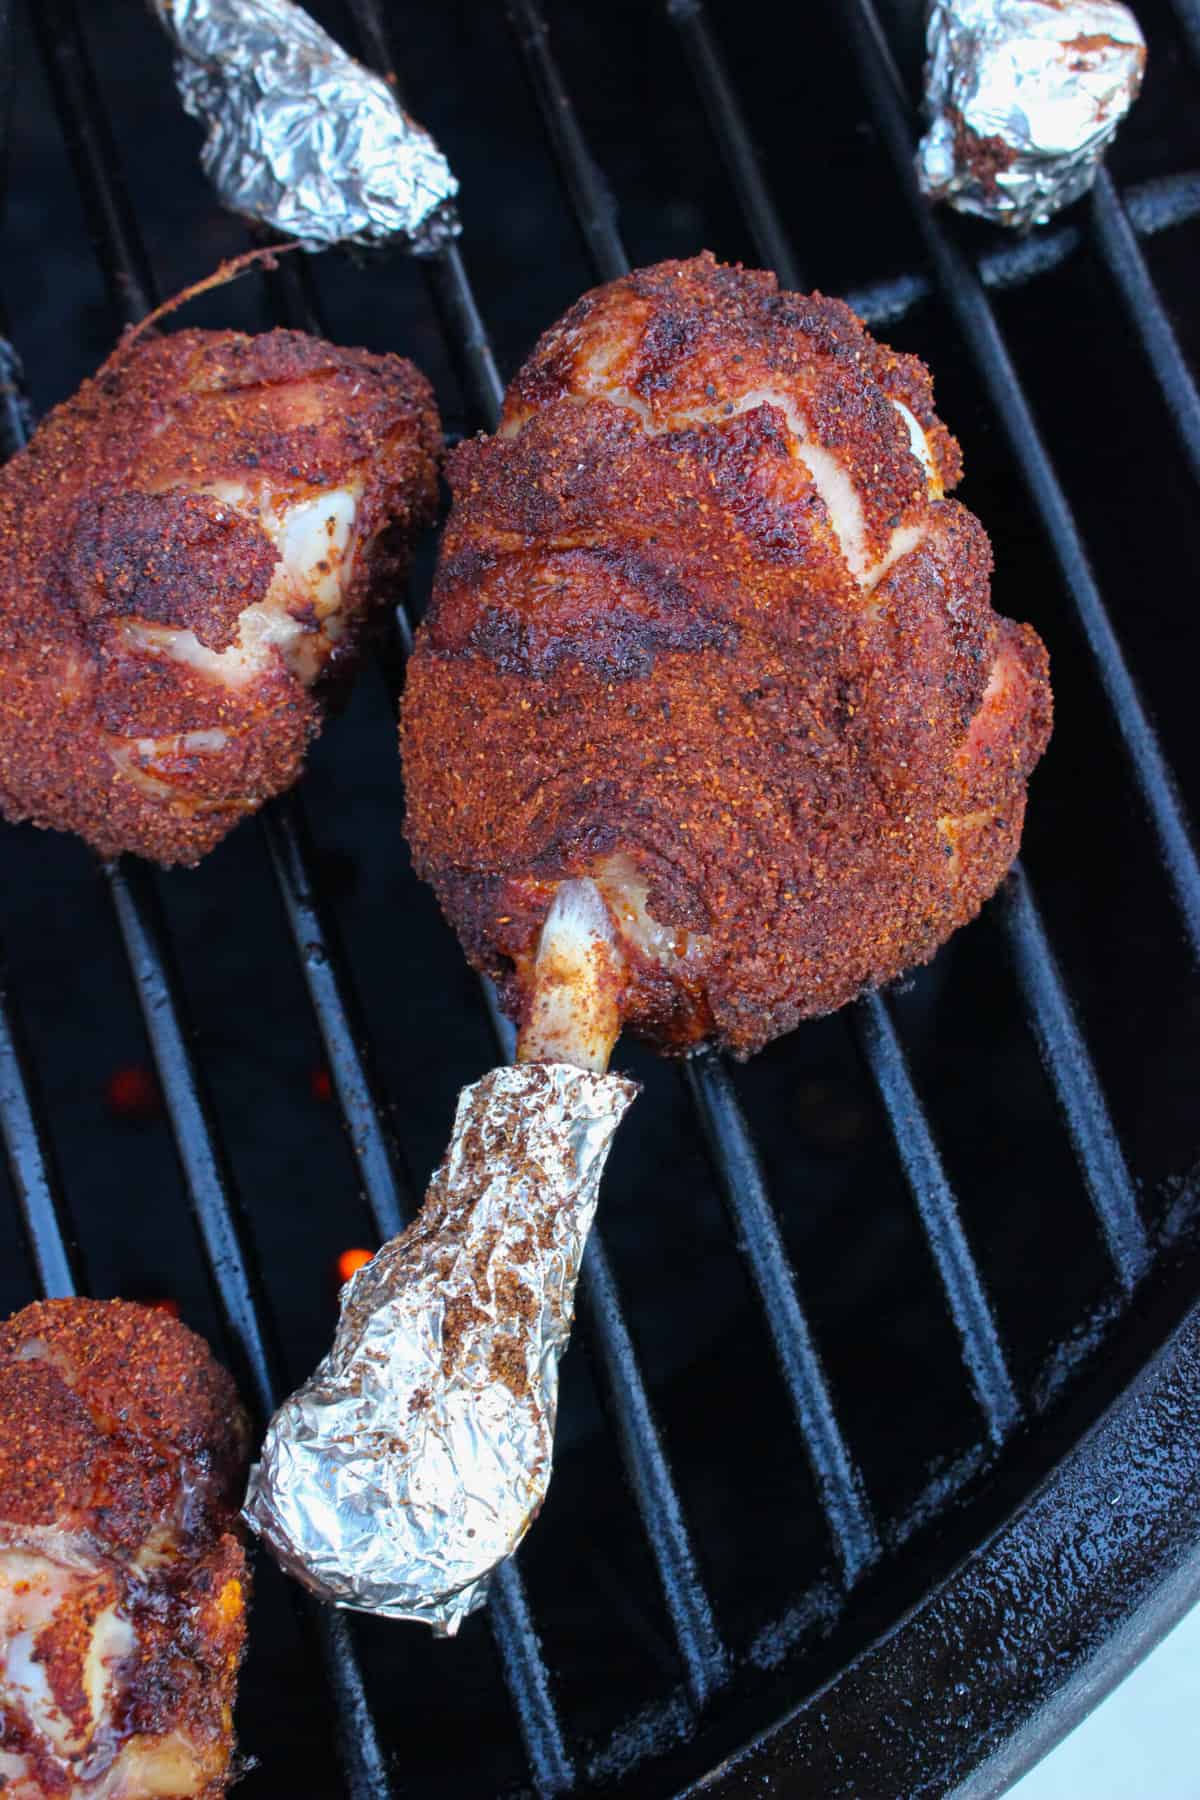 A close up shot of one of the lollipops cooking on the smoker.